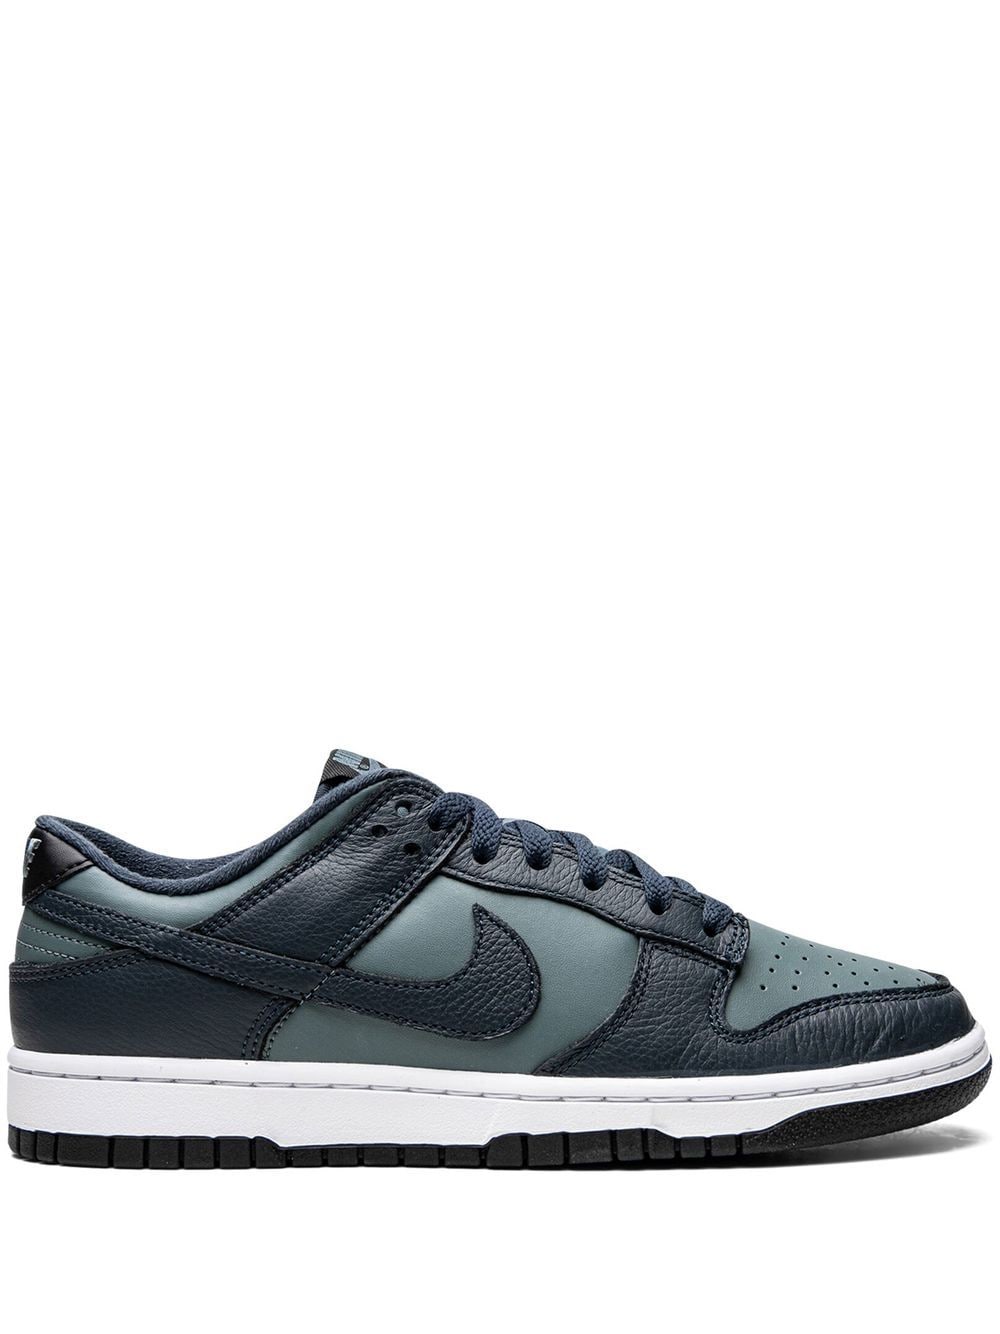 Nike Dunk Low PRM "Armory Navy" sneakers - Blue von Nike